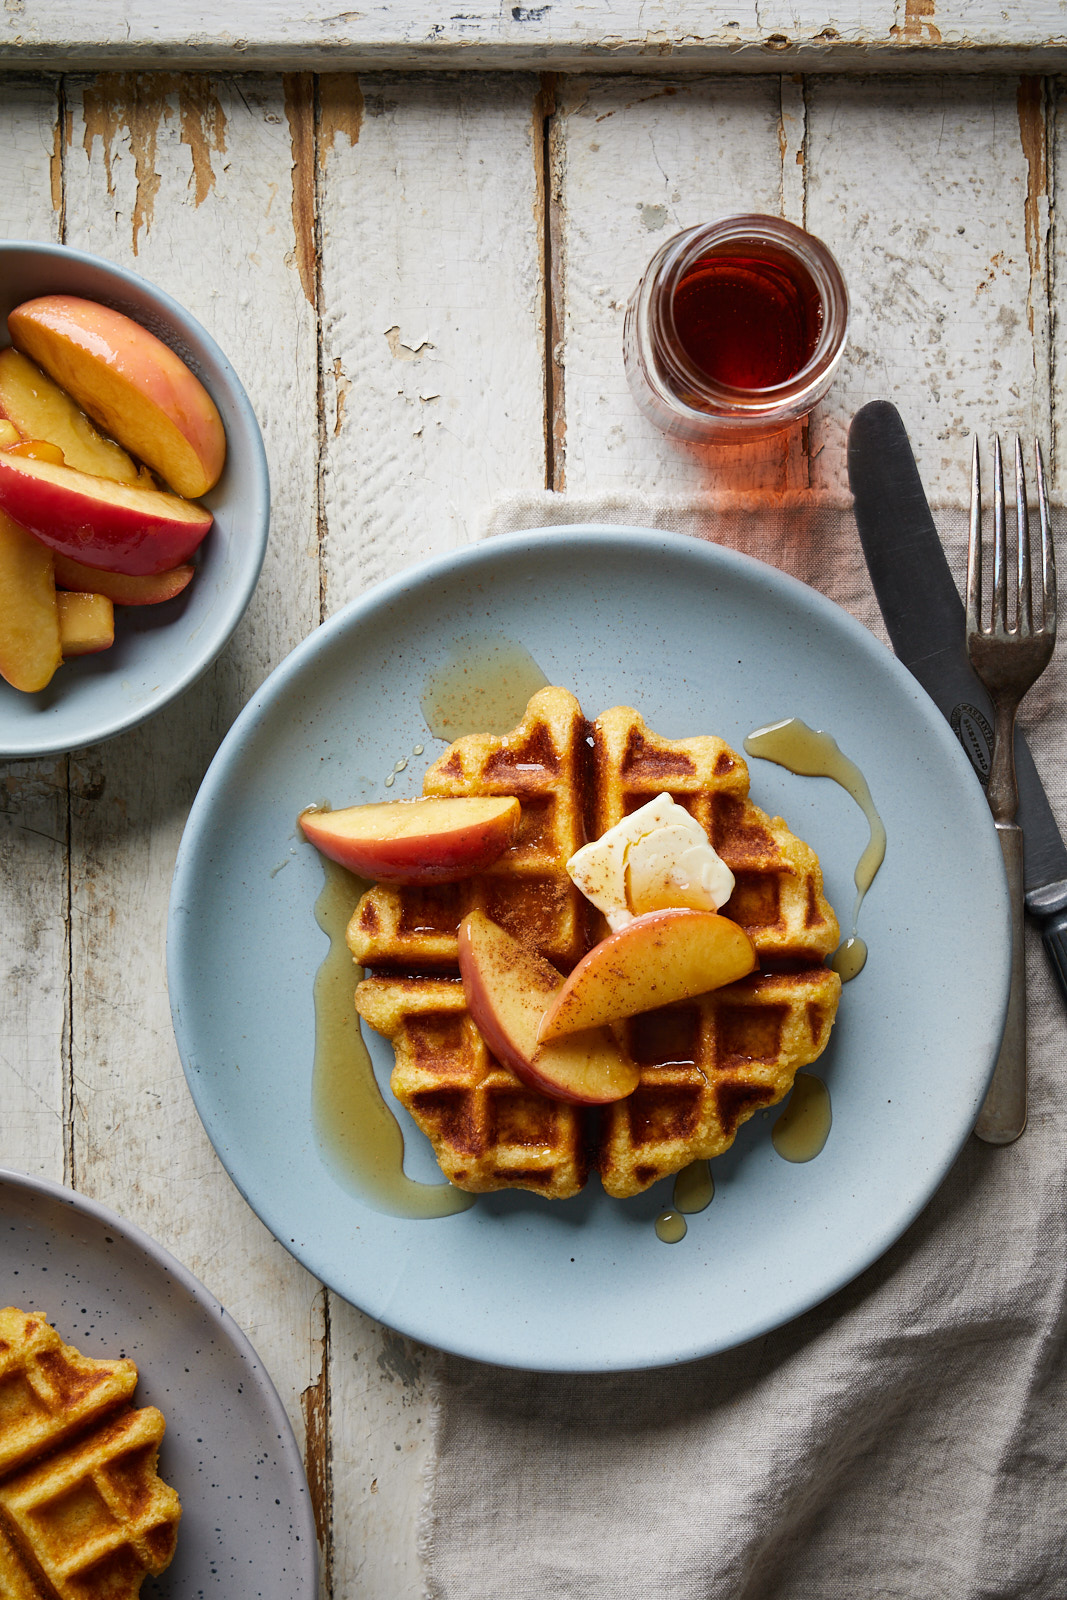 Corn Waffles With Caramelized Apples